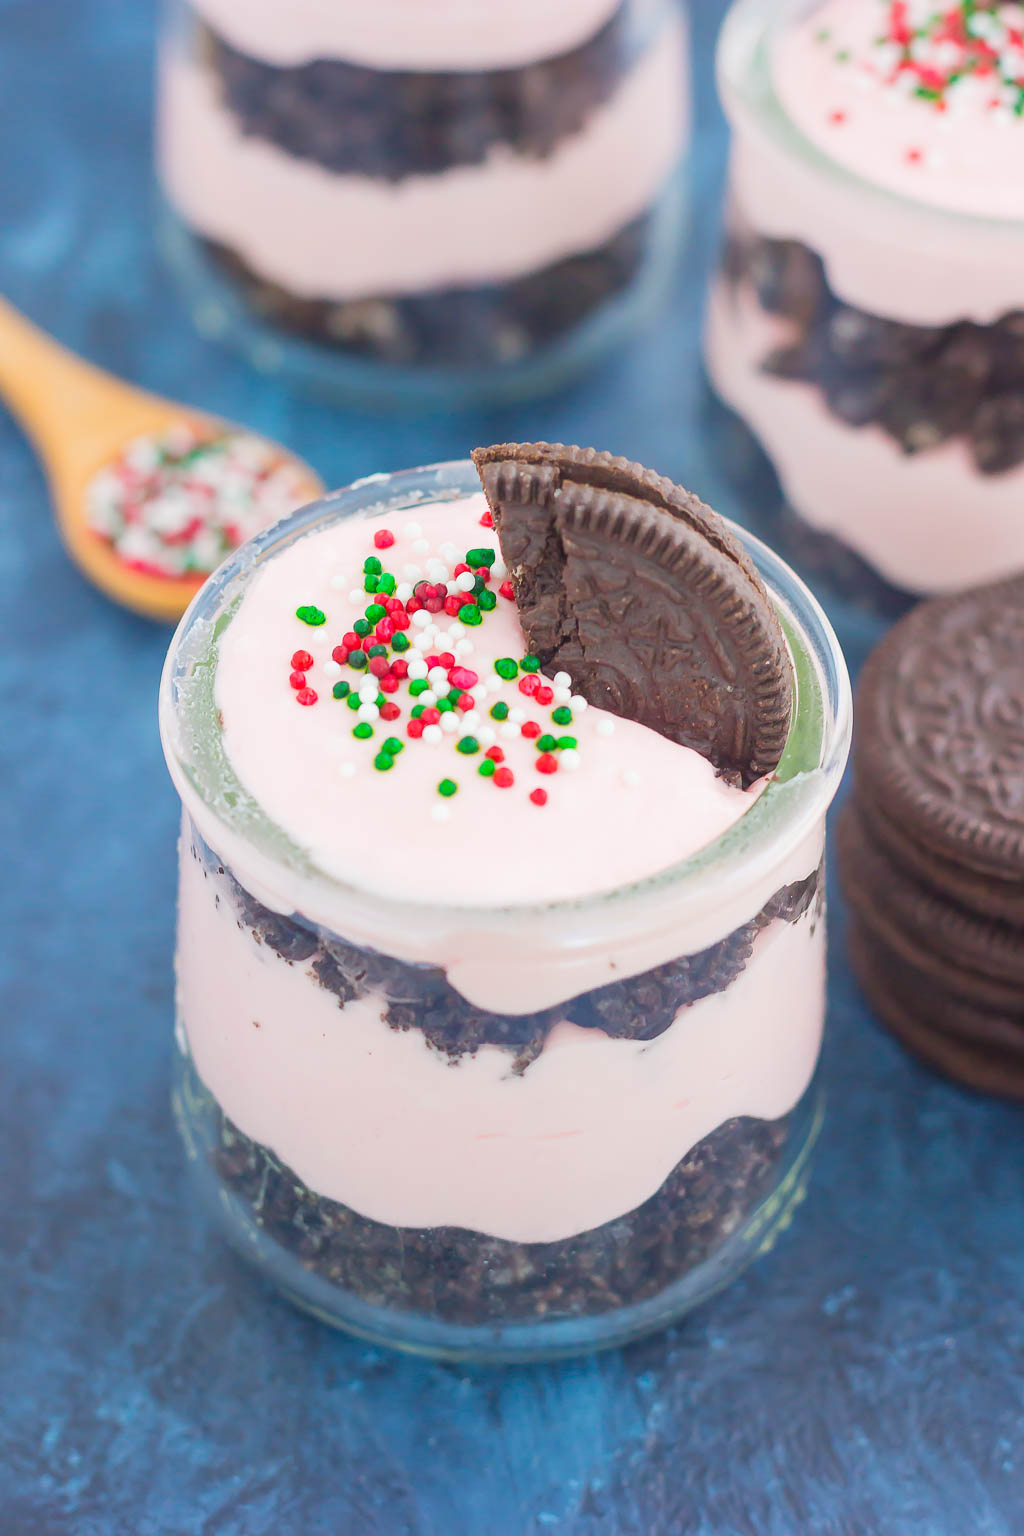 This No-Bake Peppermint Oreo Cheesecake features a sweet and creamy peppermint cheesecake batter that requires no oven. A rich, Oreo cookie crust and festive sprinkles make this cheesecake perfect for the holidays!